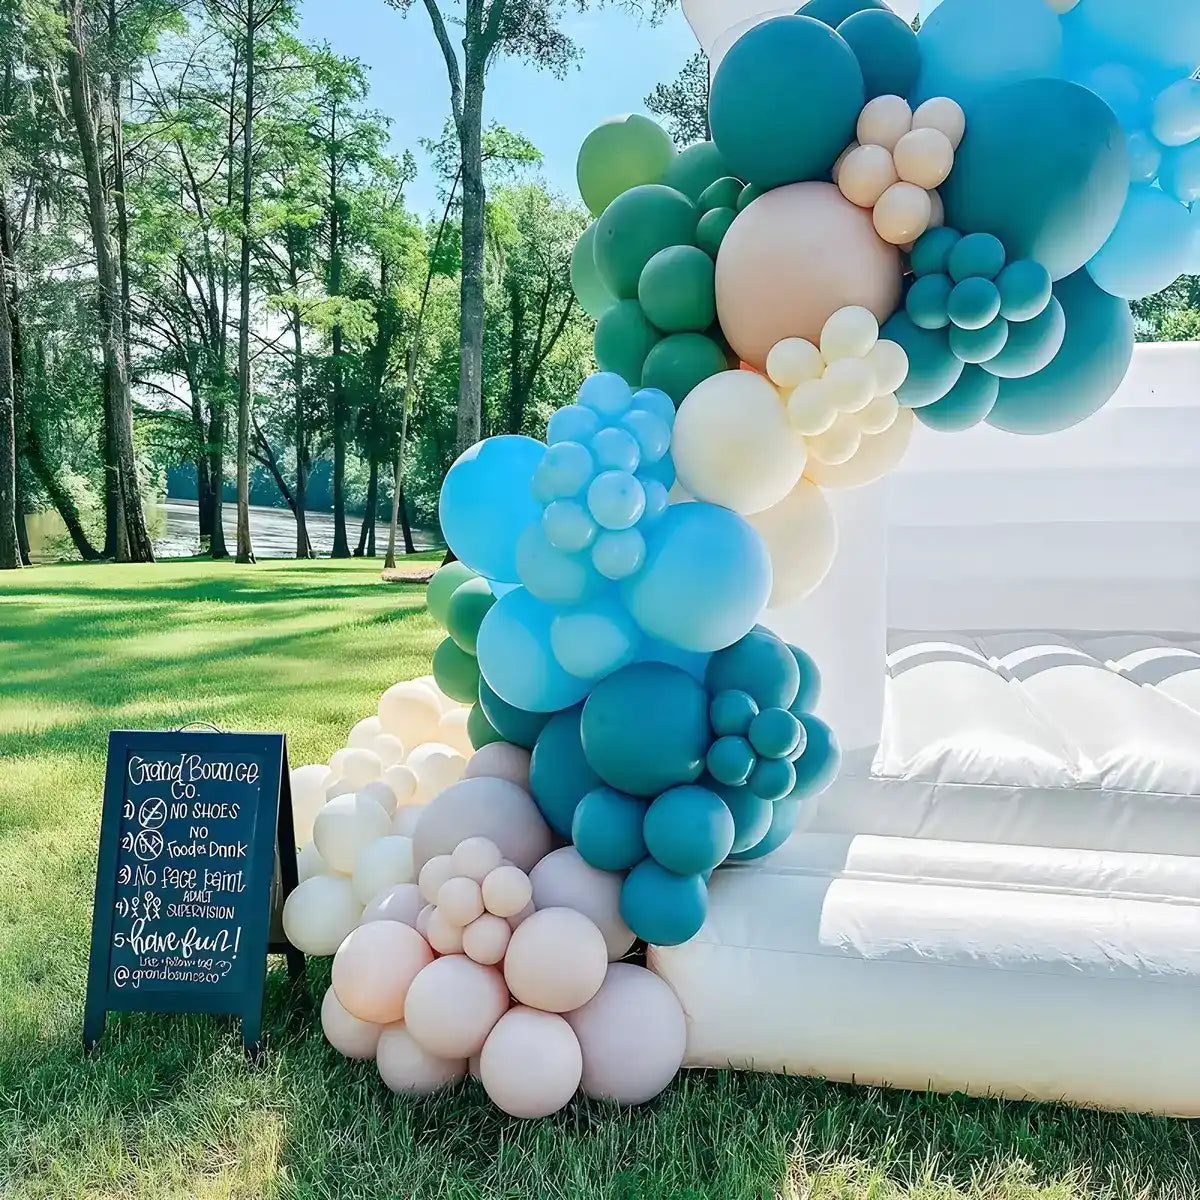 White bounce house decorated with balloons and birthday party signpost